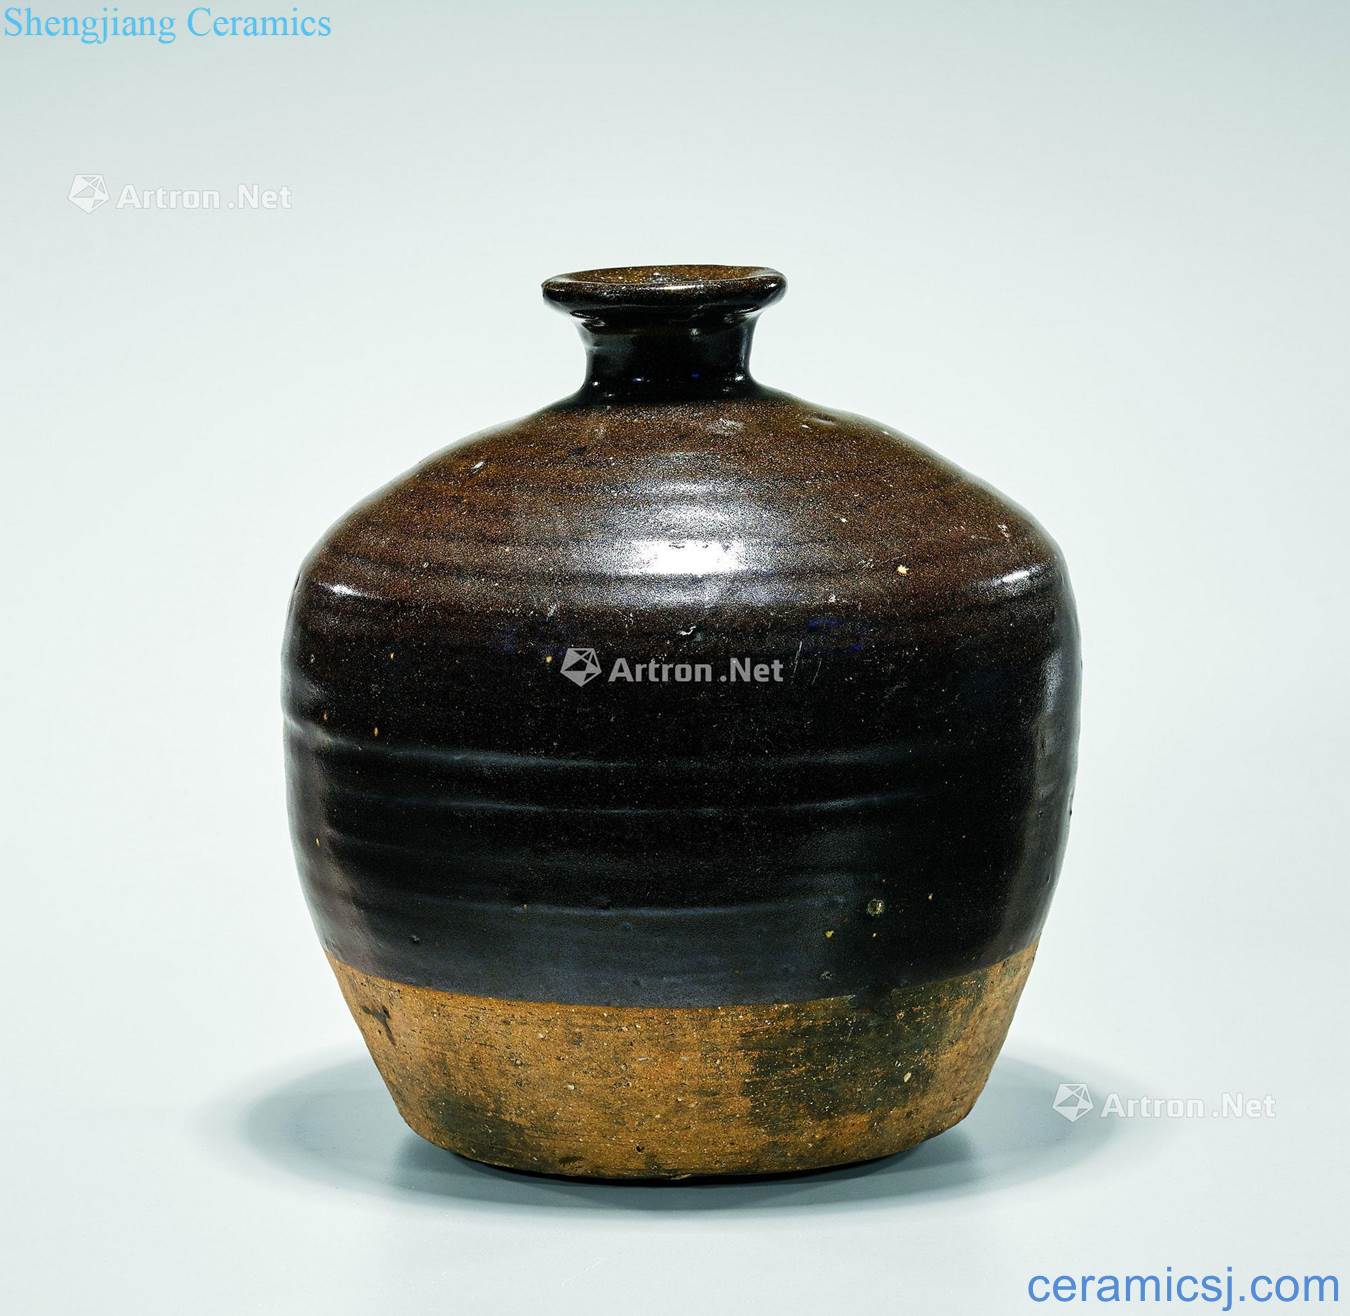 The jin or the yuan dynasty Brown glaze stone bottle